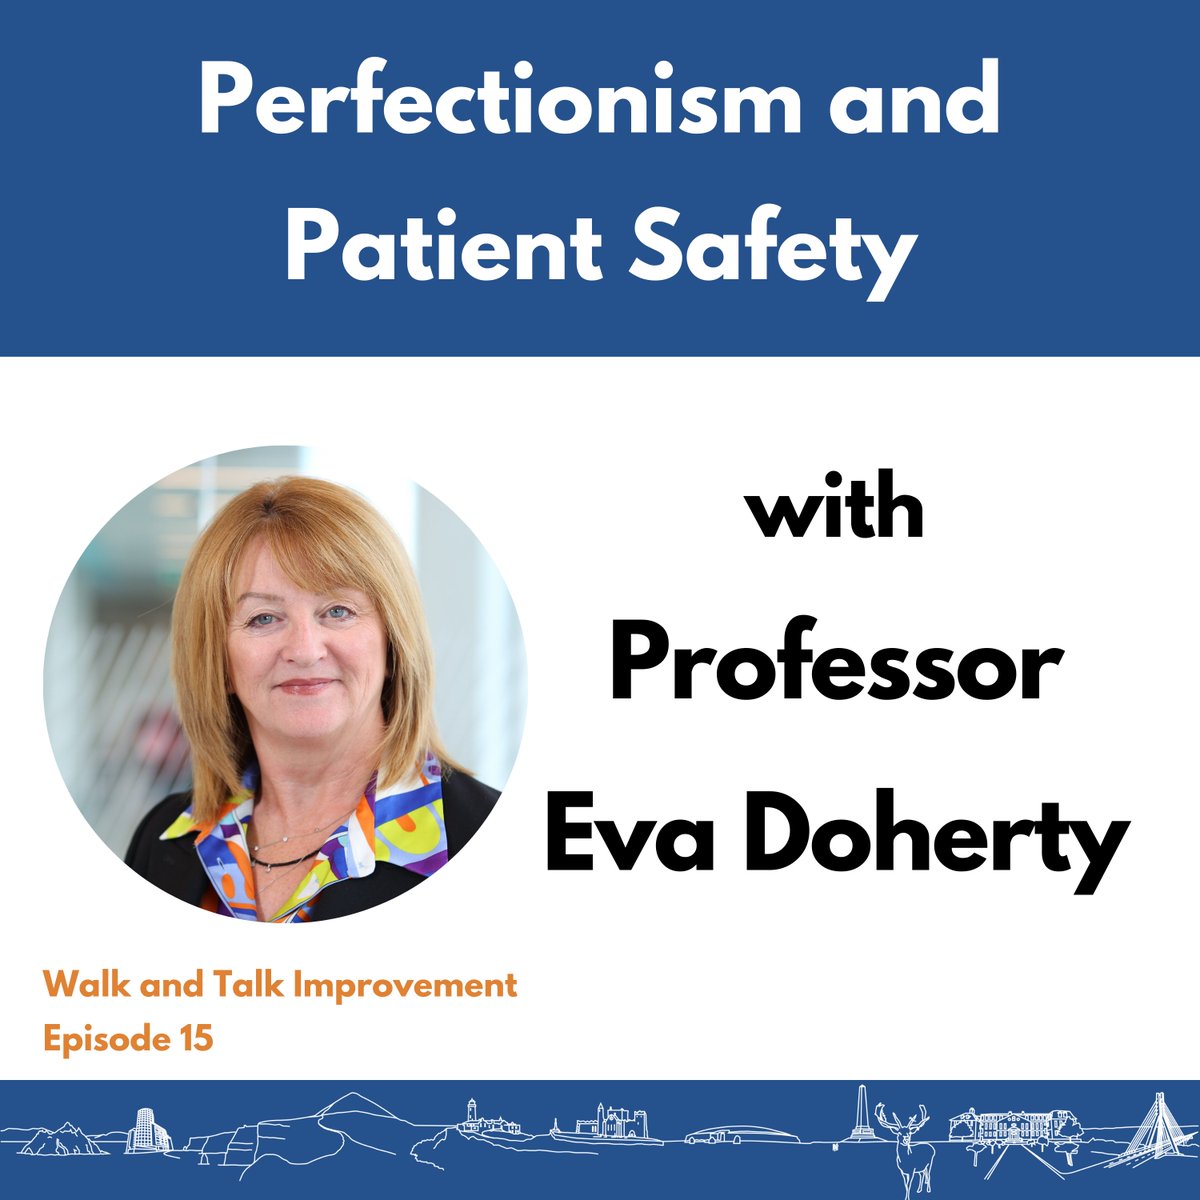 'You can't pour from an empty cup.' - @EvaDoherty Huge thanks to our #opendisclosure team for helping us launch ep 15 of the Walk & Talk Improvement podcast. @juanitaguidera & Eva chat about the impact of perfectionism in the workplace & our wellbeing.⬇️ shows.acast.com/walk-and-talk-…